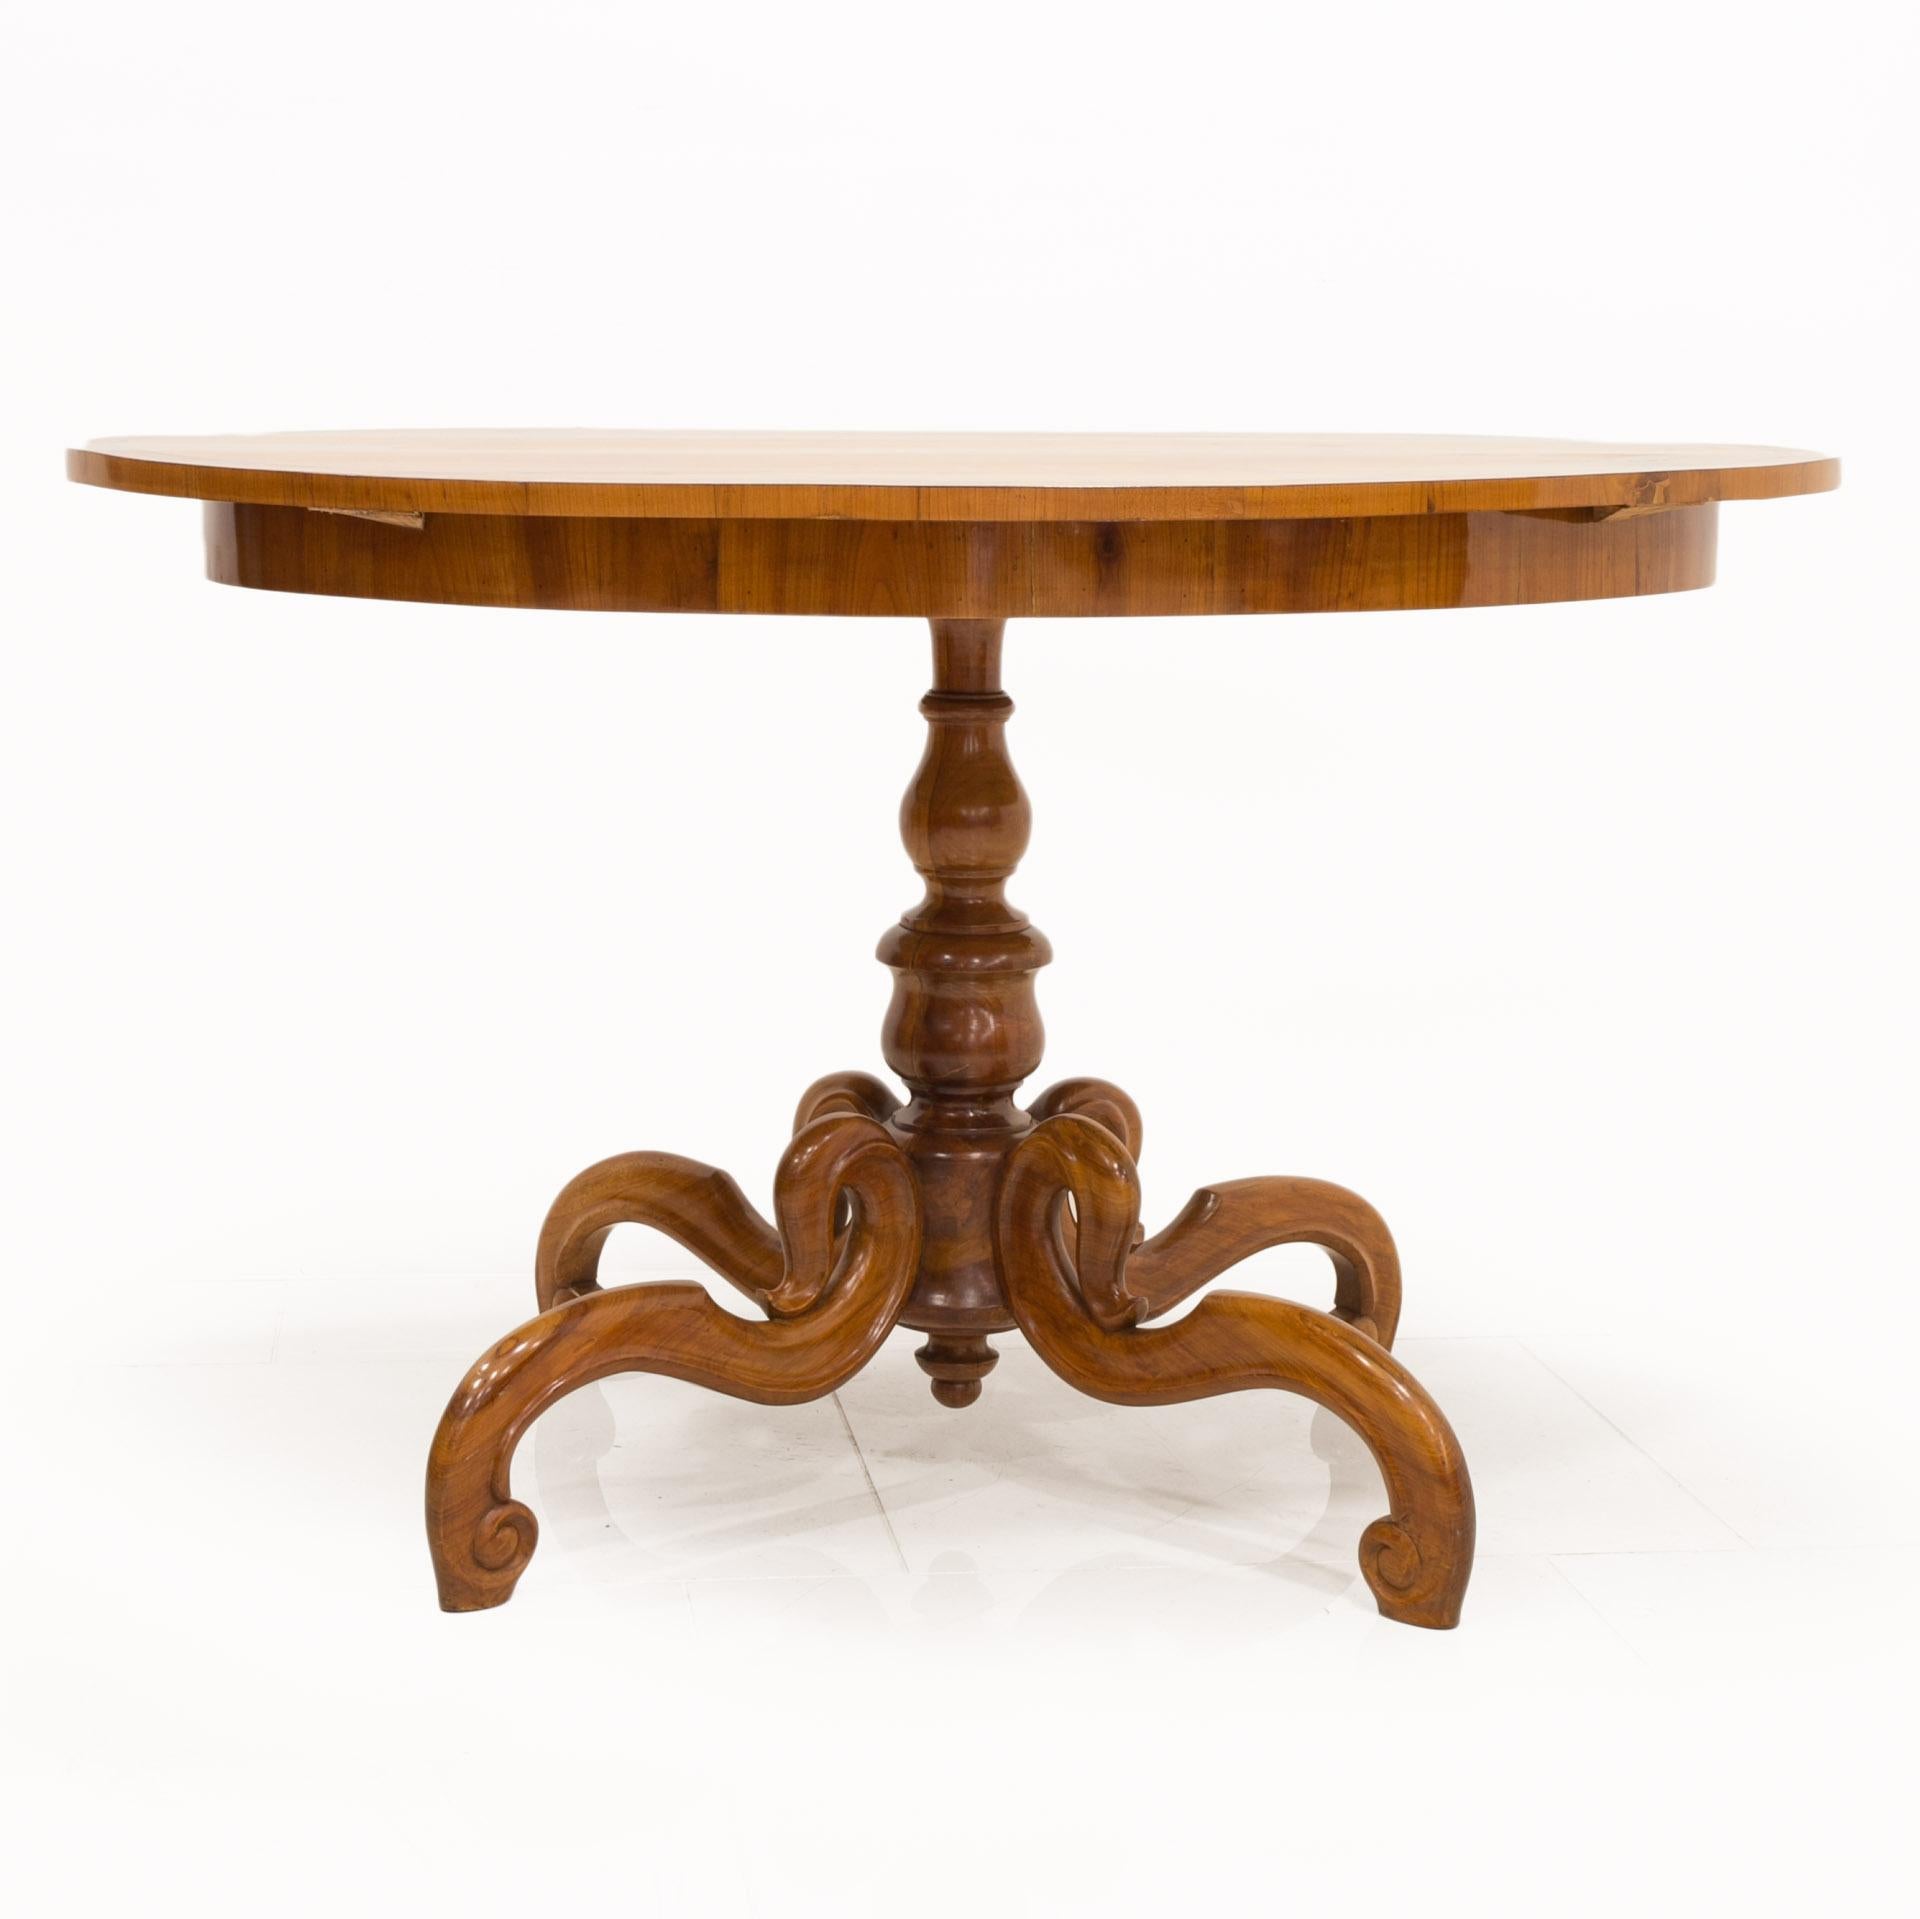 This beautiful, unique, original, oval Biedermeier table comes from Austria from 1st half of the 19th century. The leg is made of cherry wood. Surface was finished with shellac polish, applied by hand with a tampon, which, in addition to an